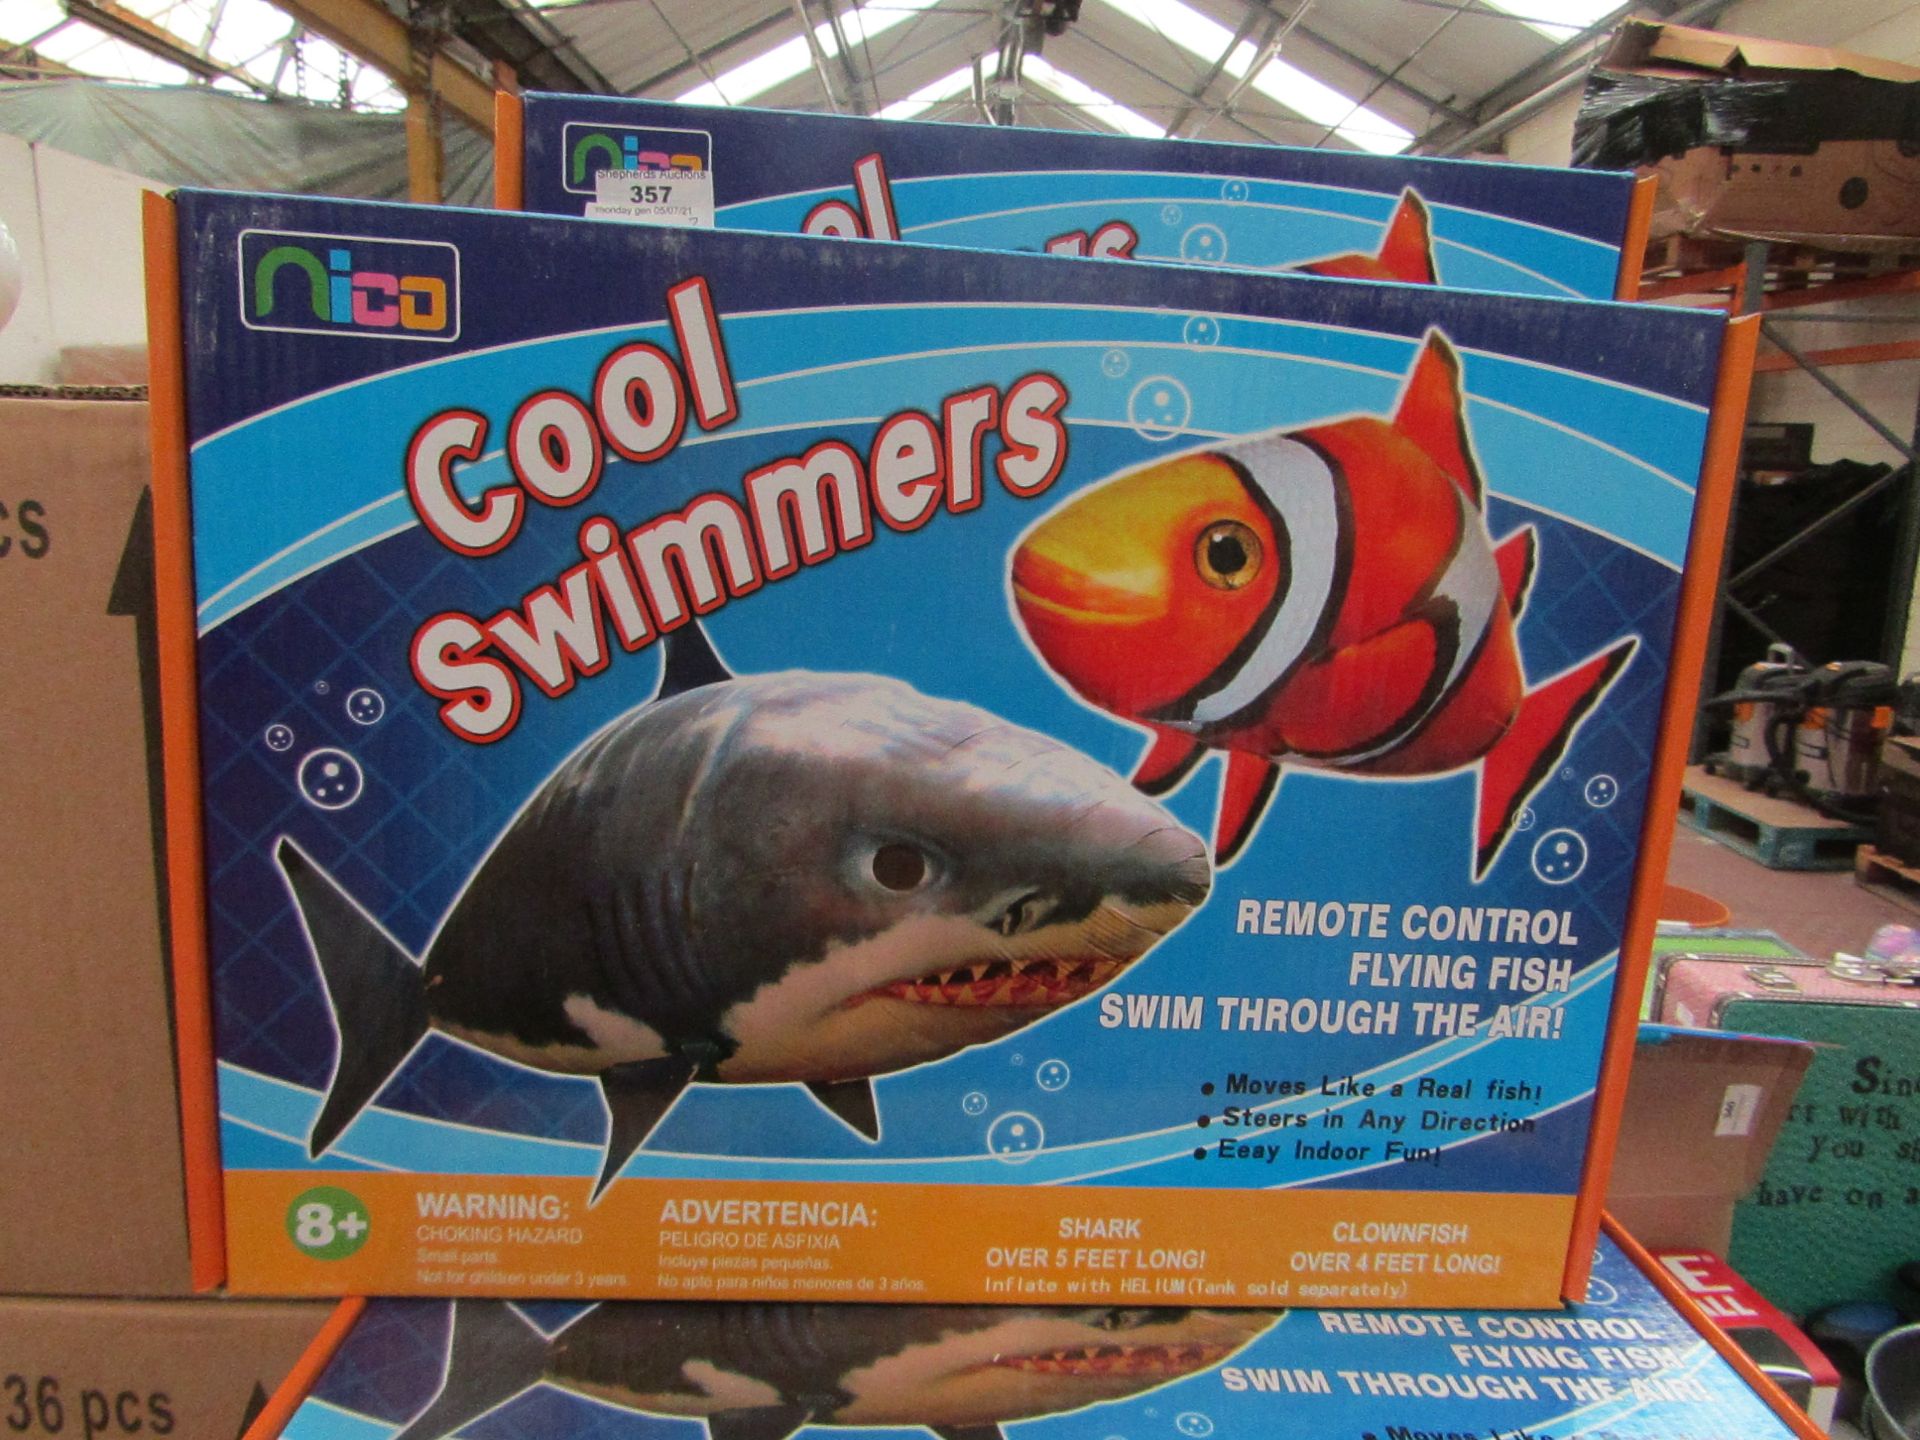 2x Nico - Cool Swimmers Remote Control Flying Fish - New & Boxed.